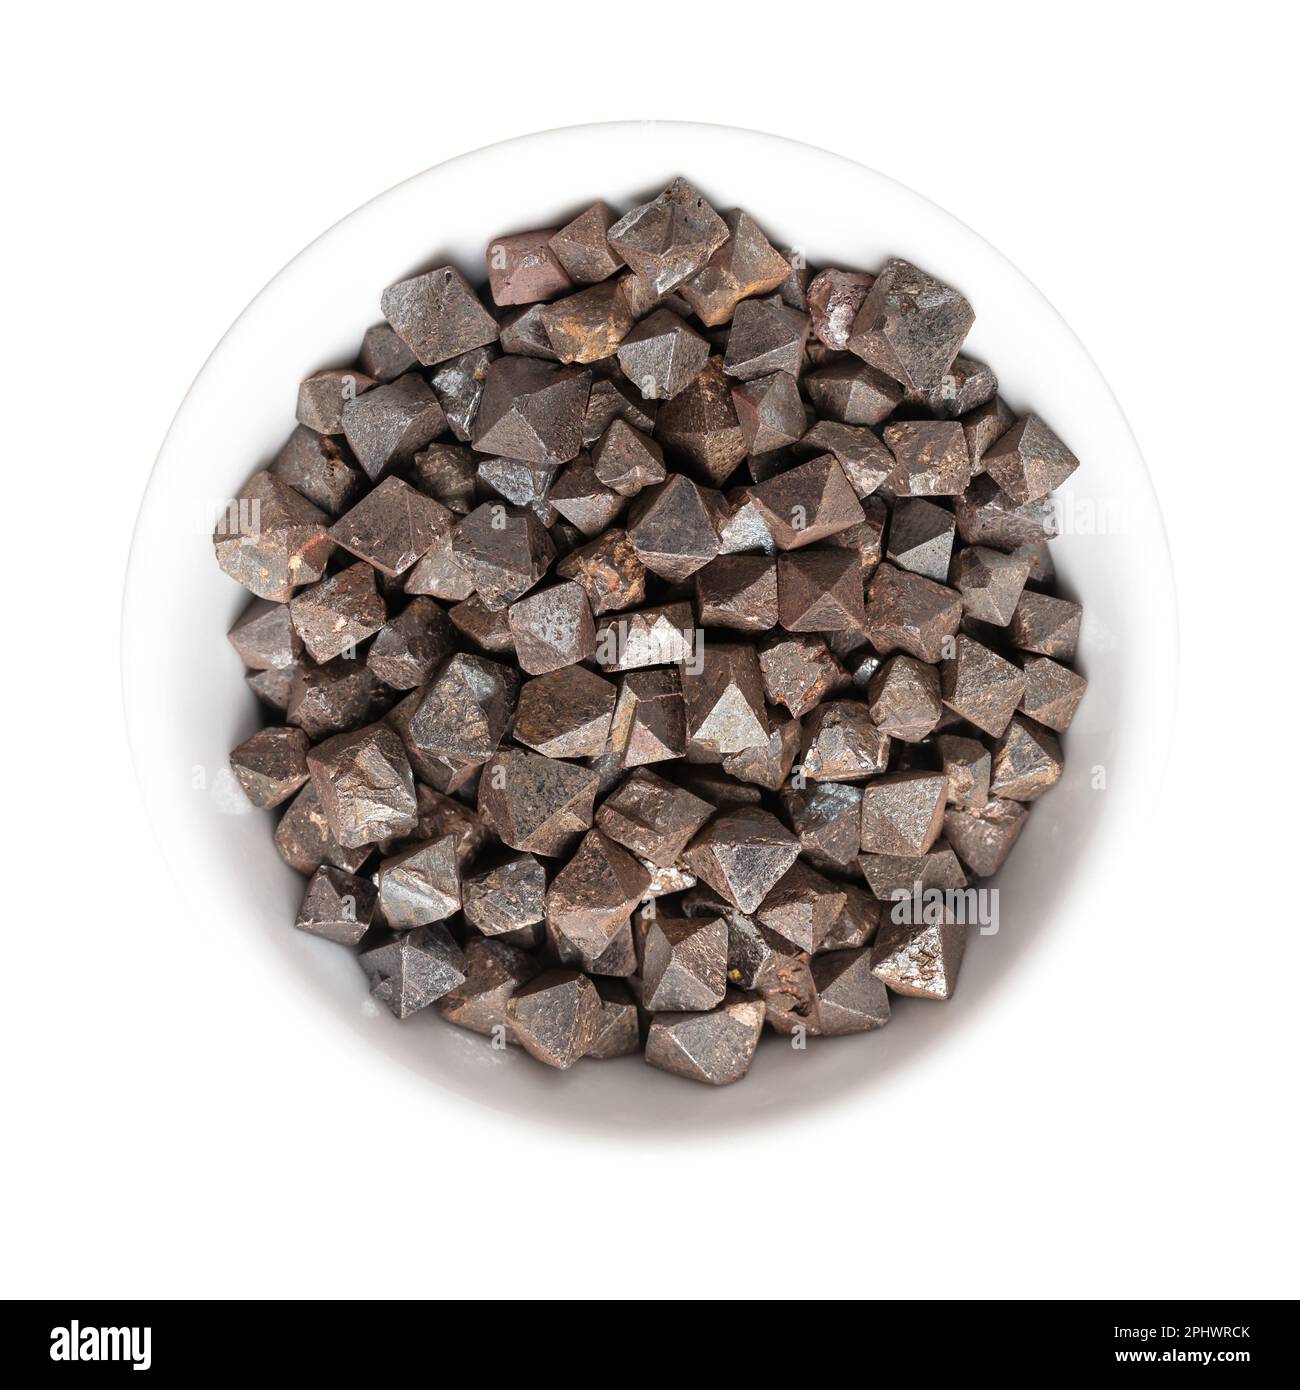 Magnetite crystals in a white bowl. Iron(II,III) oxide, octahedral, double pyramid and Platonic solid shaped. Most magnetic of all occurring minerals. Stock Photo